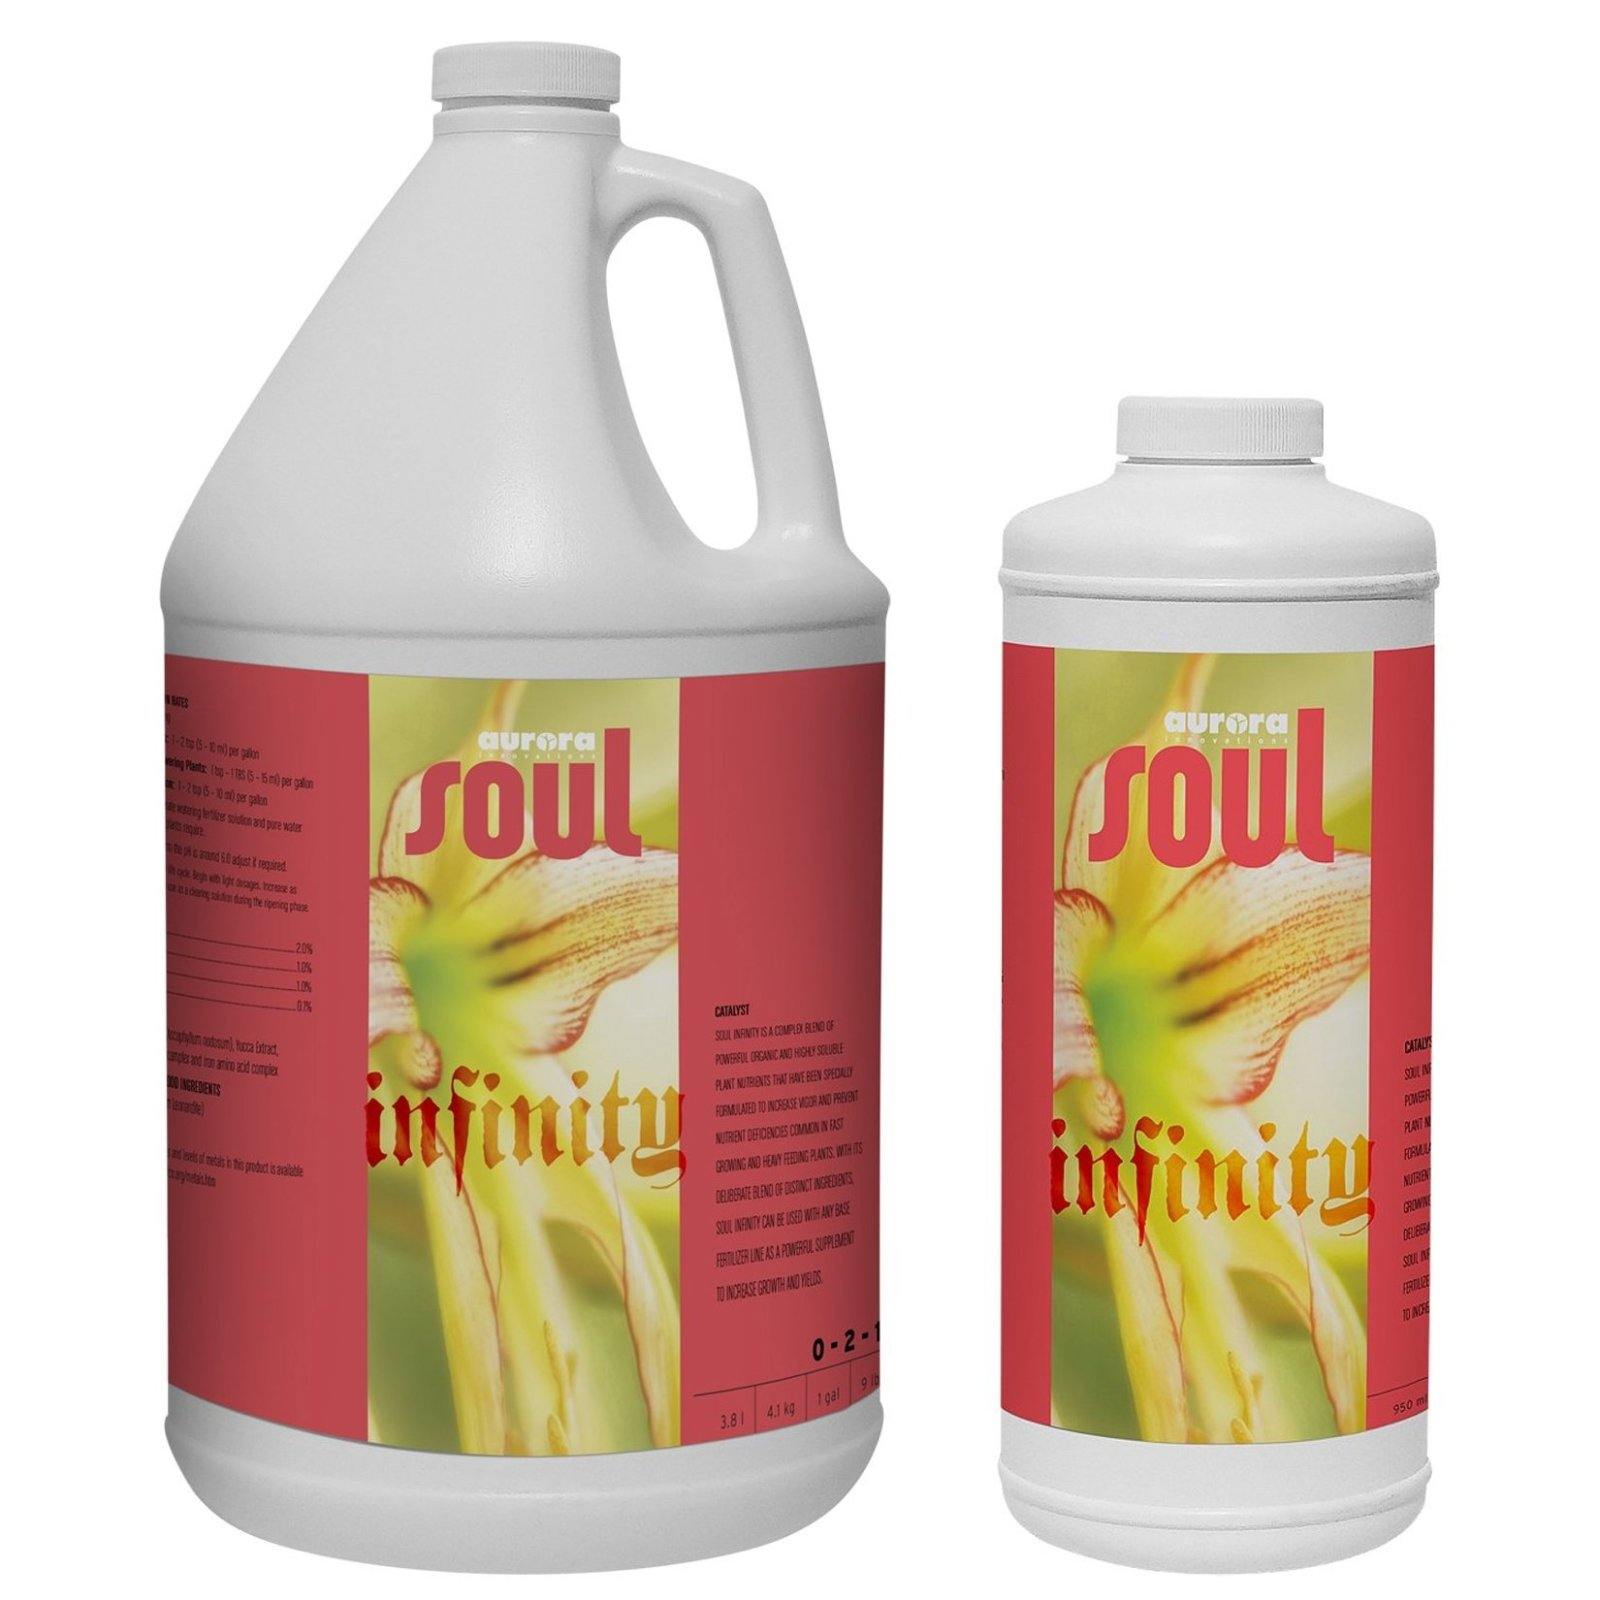 Nutrients, Additives & Solutions - Infinity by Soul 0.5-2-1 - 609728632960- Gardin Warehouse